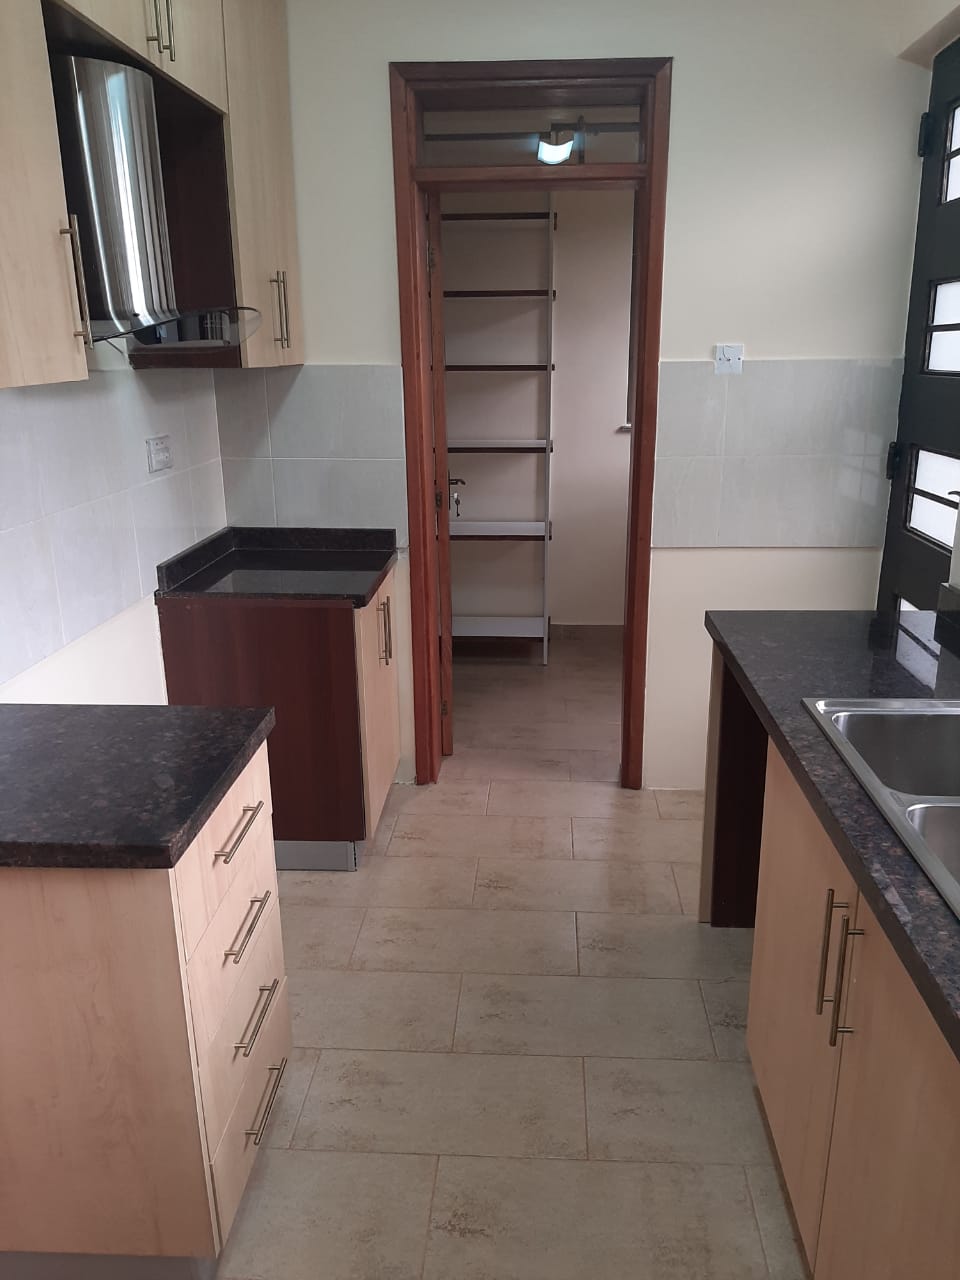 3 bedroom House to let Located on Dagoretti Road Near the Hub Mall and the bypass. Shared compound of 3 houses. No pets allowed. Ksh180k per month (4)